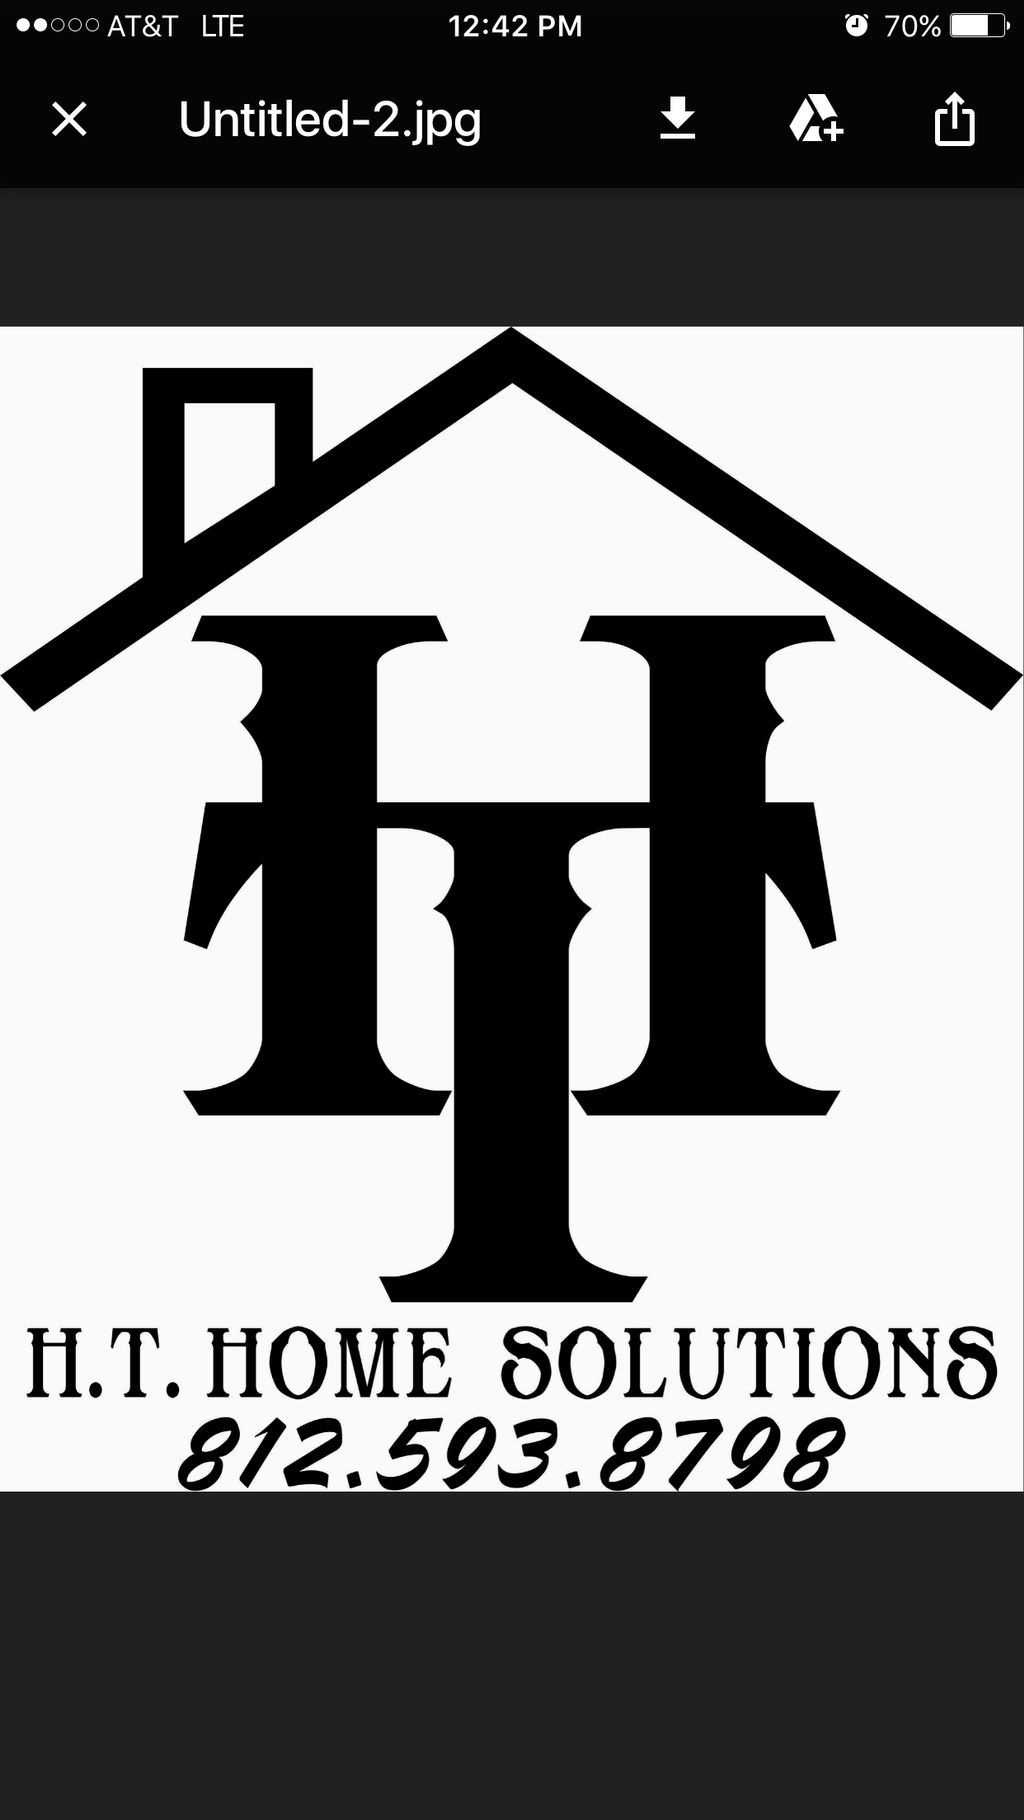 HT Home Solutions